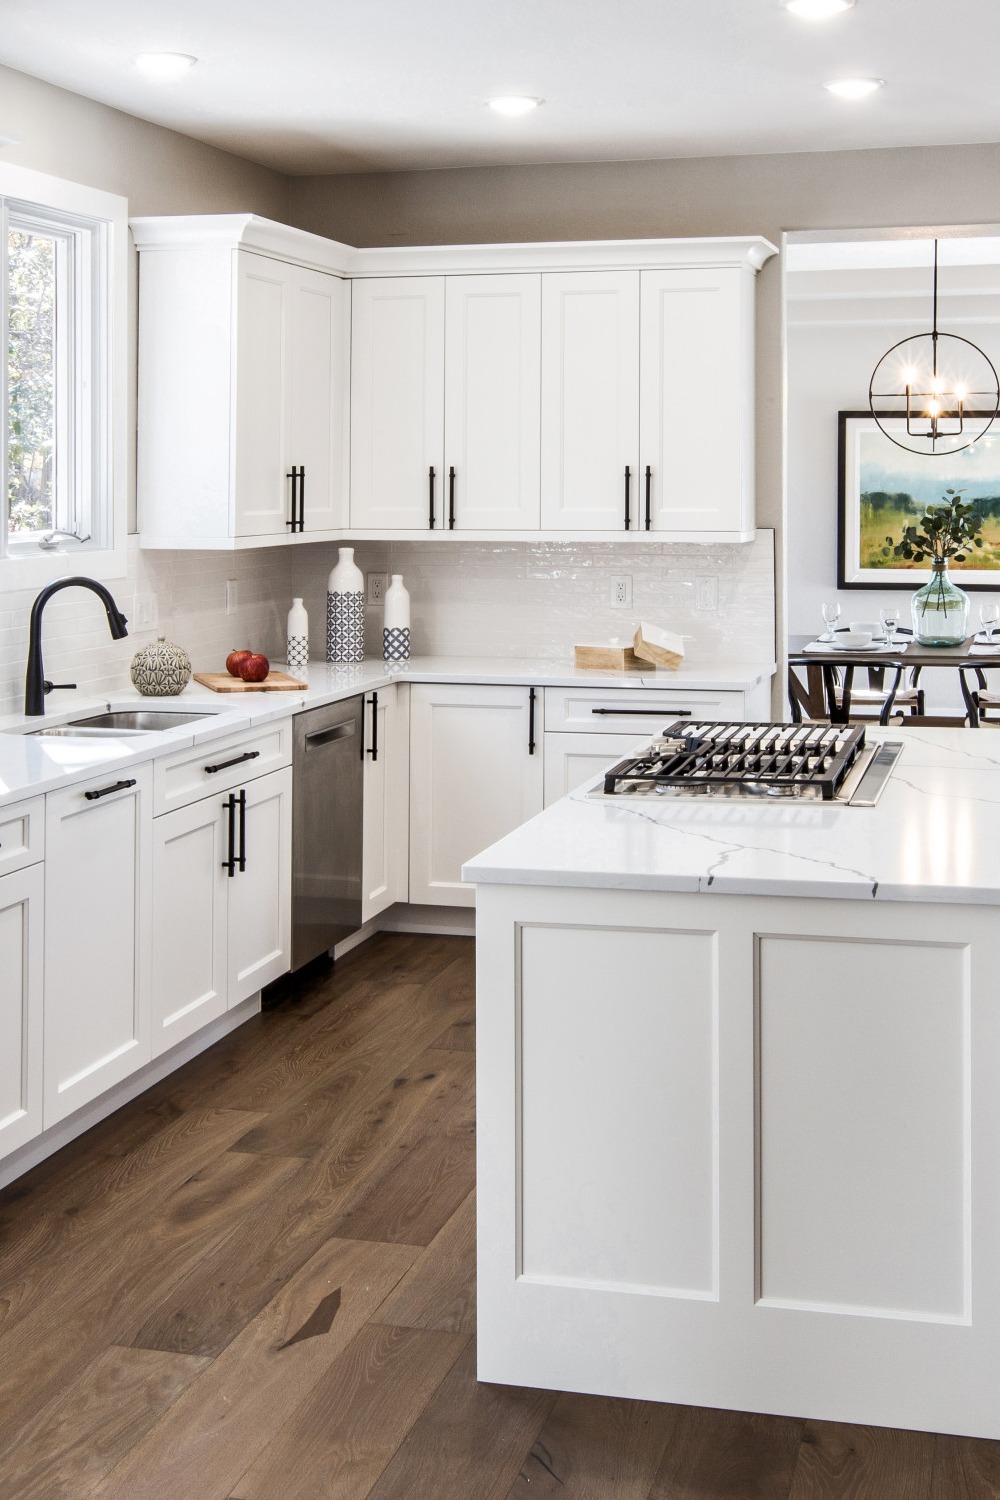 Classic Subway Tiles White Shaker Cabinets White Tiles Black Hardware Contemporary Look